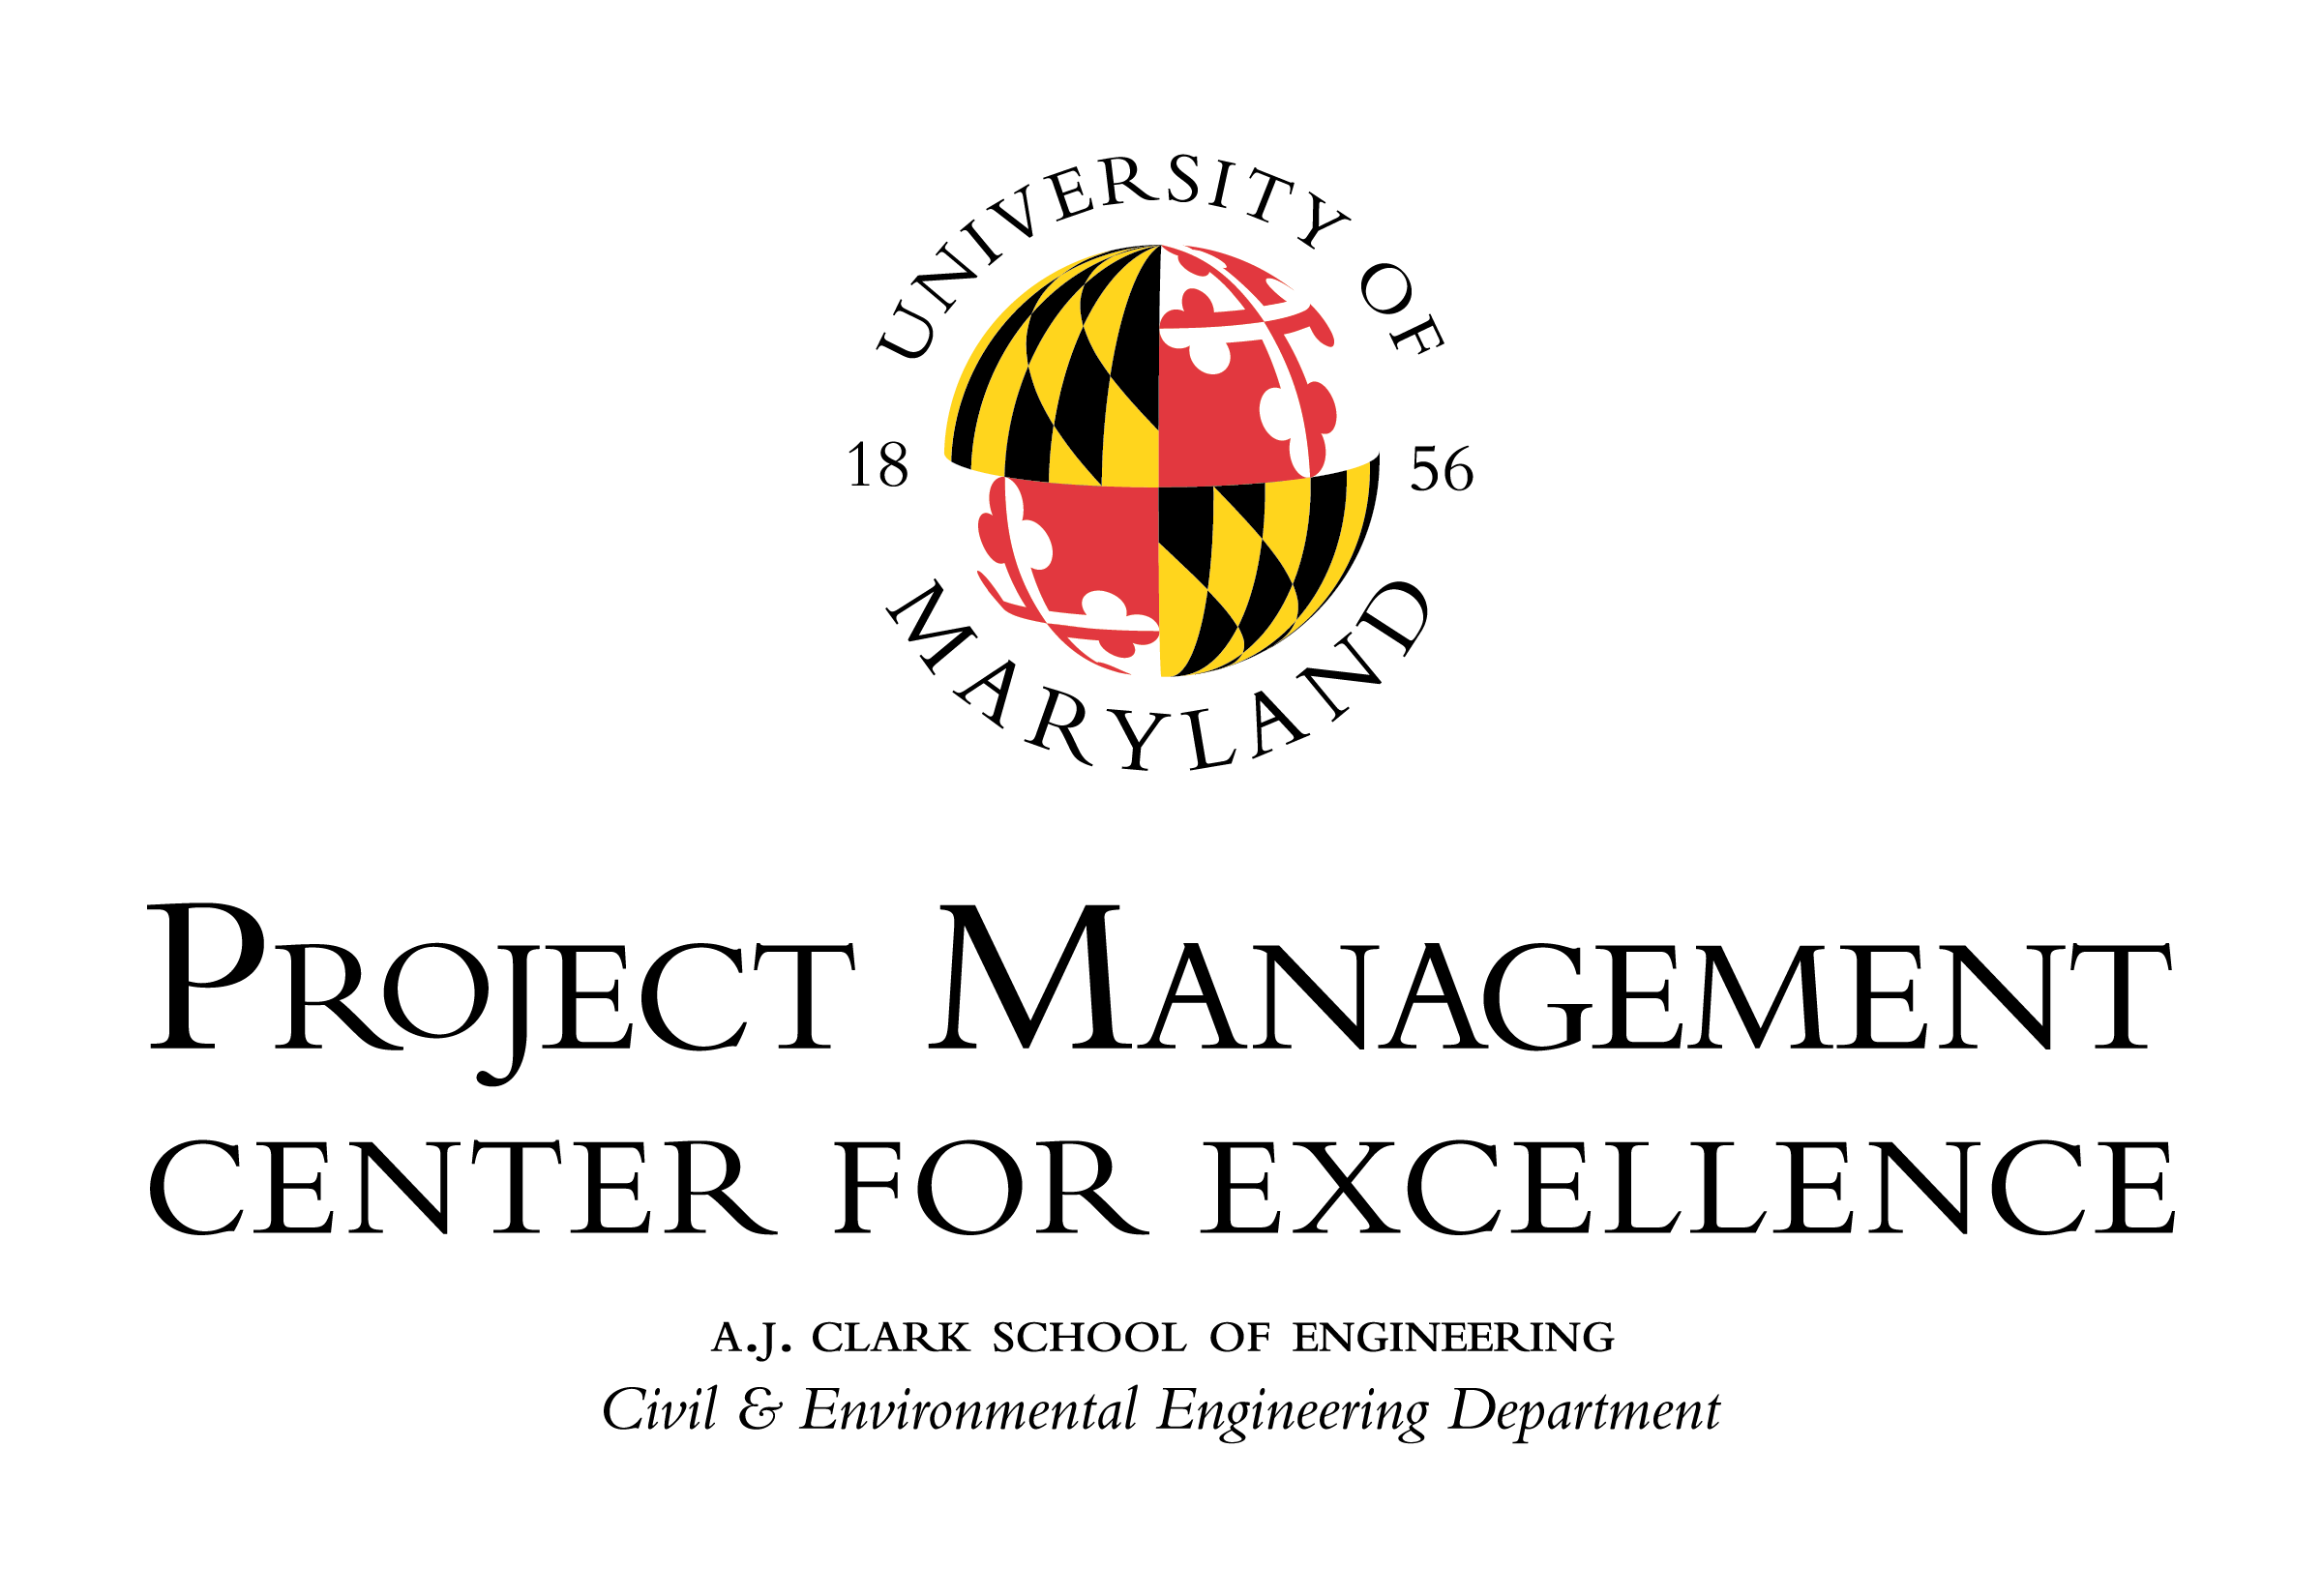 UMD Project Manager Center for Excellence